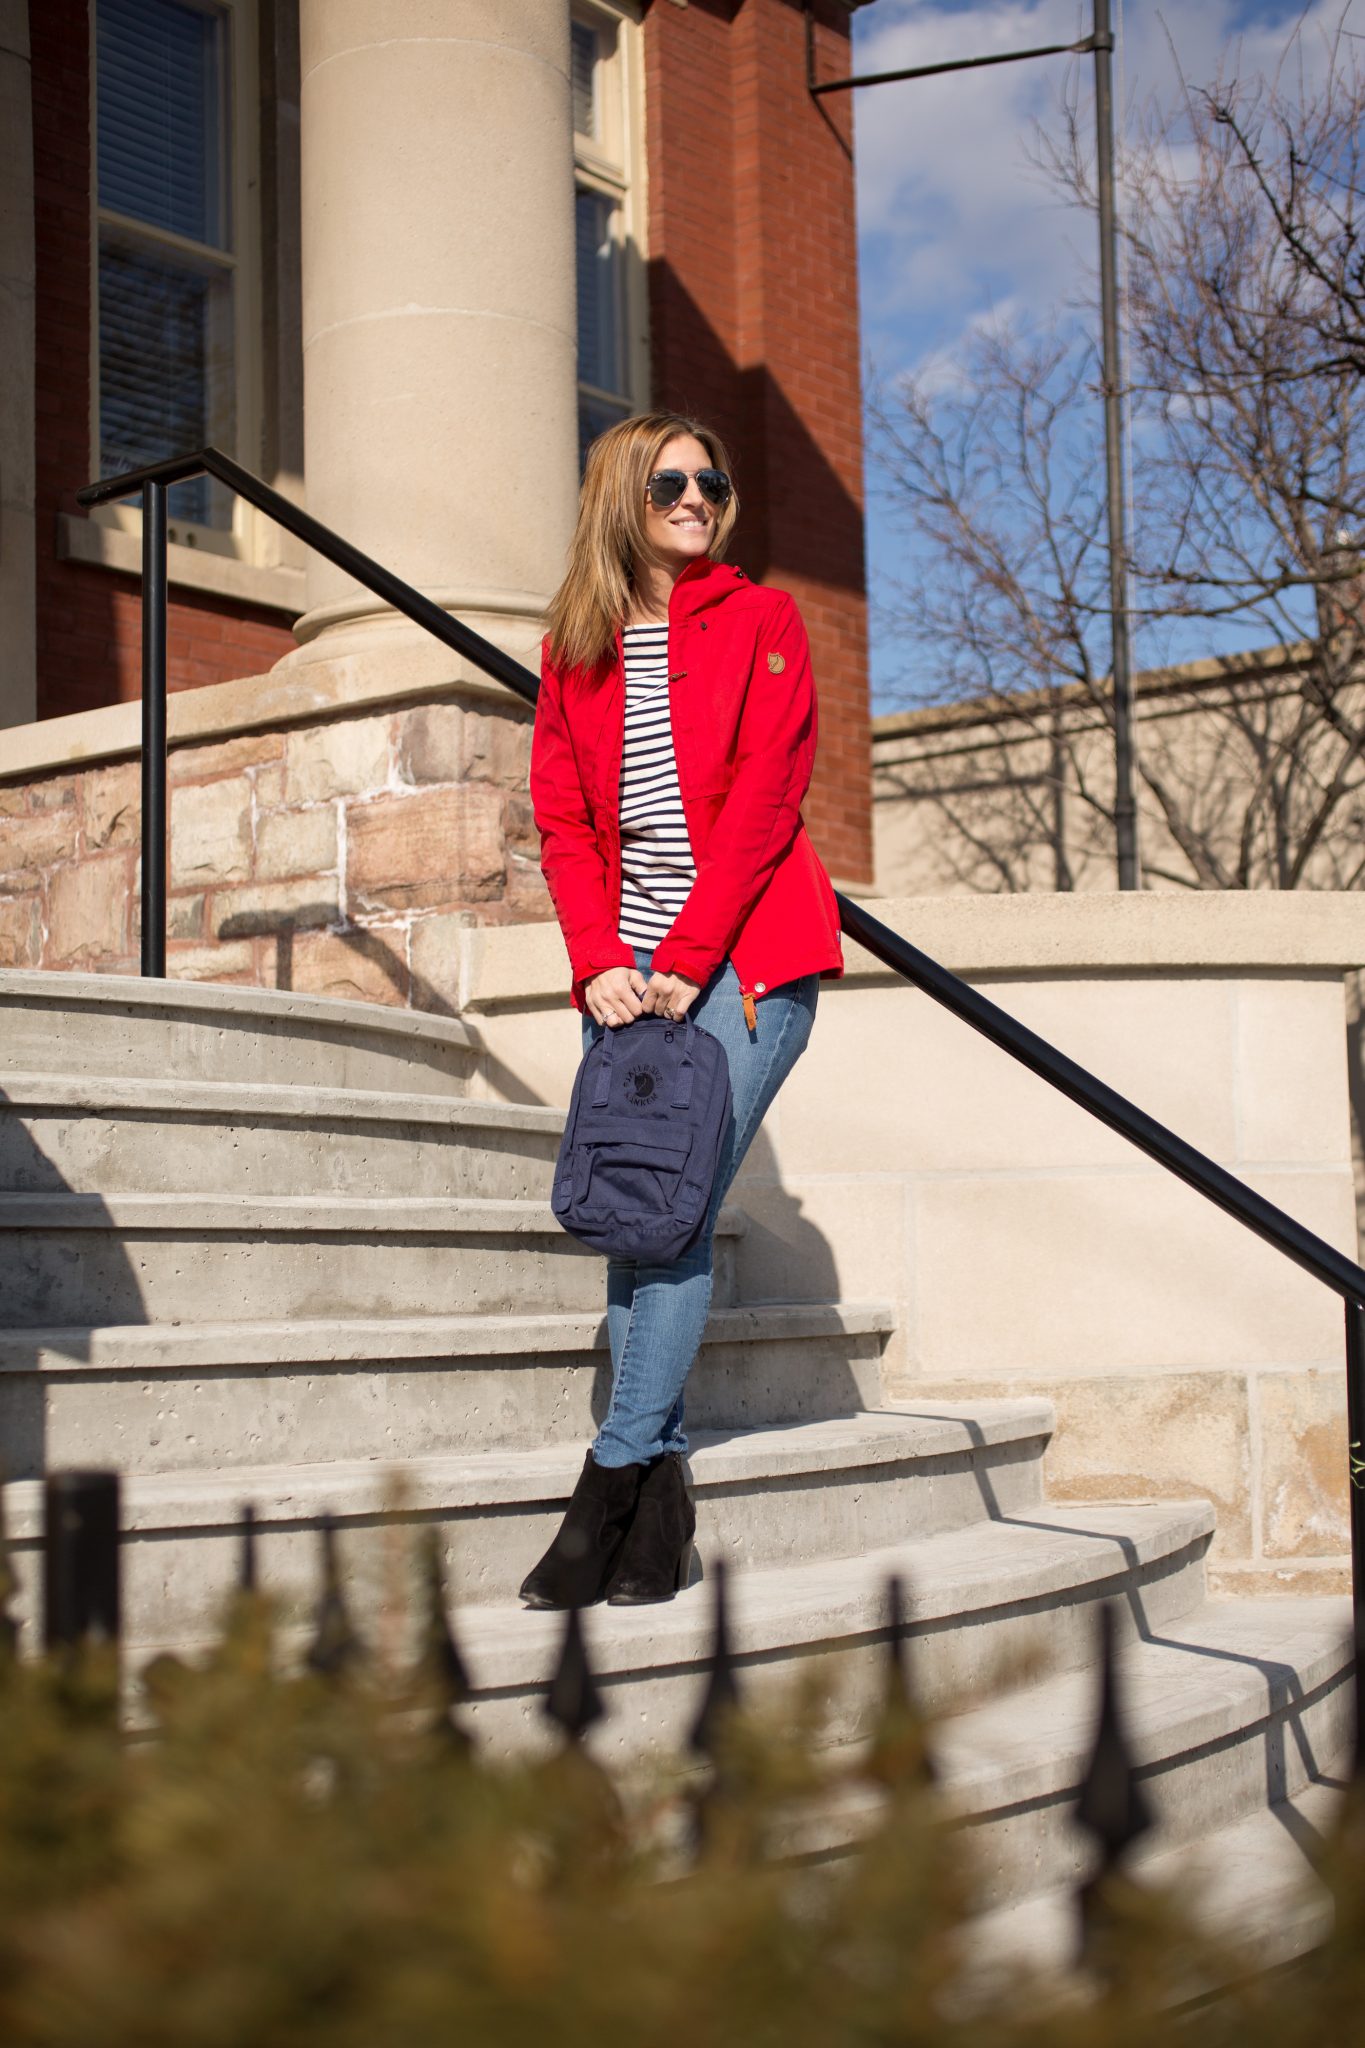 Abisko lite Jacket in red from Fjallraven Canada, re-kanken Mini backpack in navy, blue and white striped shirt from J.Crew, jean machine jeans, black suede booties